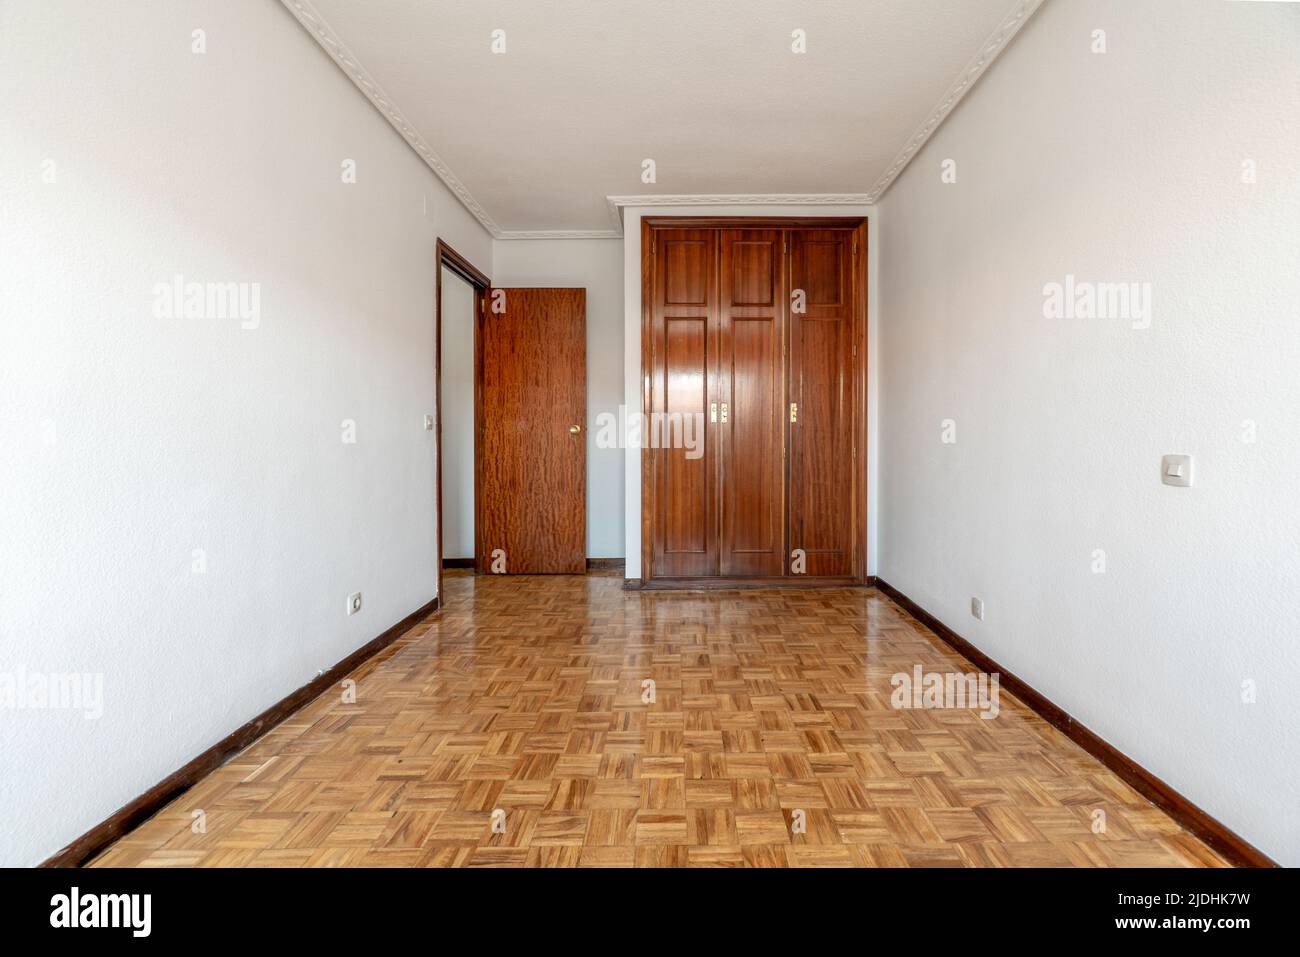 Empty room with shiny oak parquet flooring, plain white painted walls and reddish woodwork on doors and built-in wardrobe Stock Photo